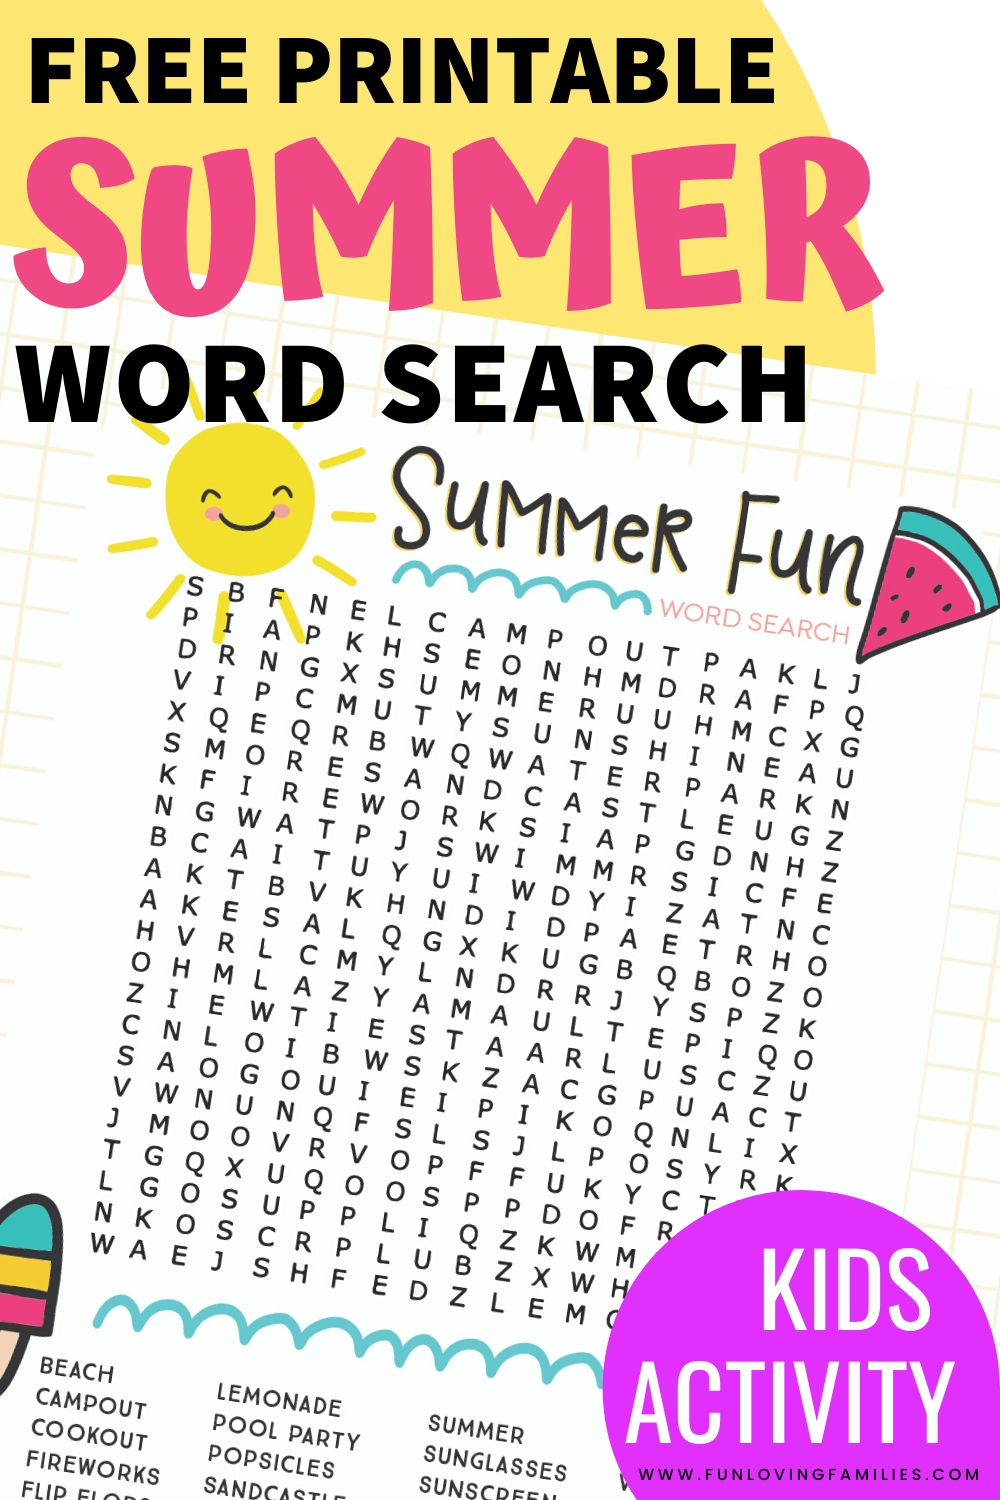 Summer Word Search Printable